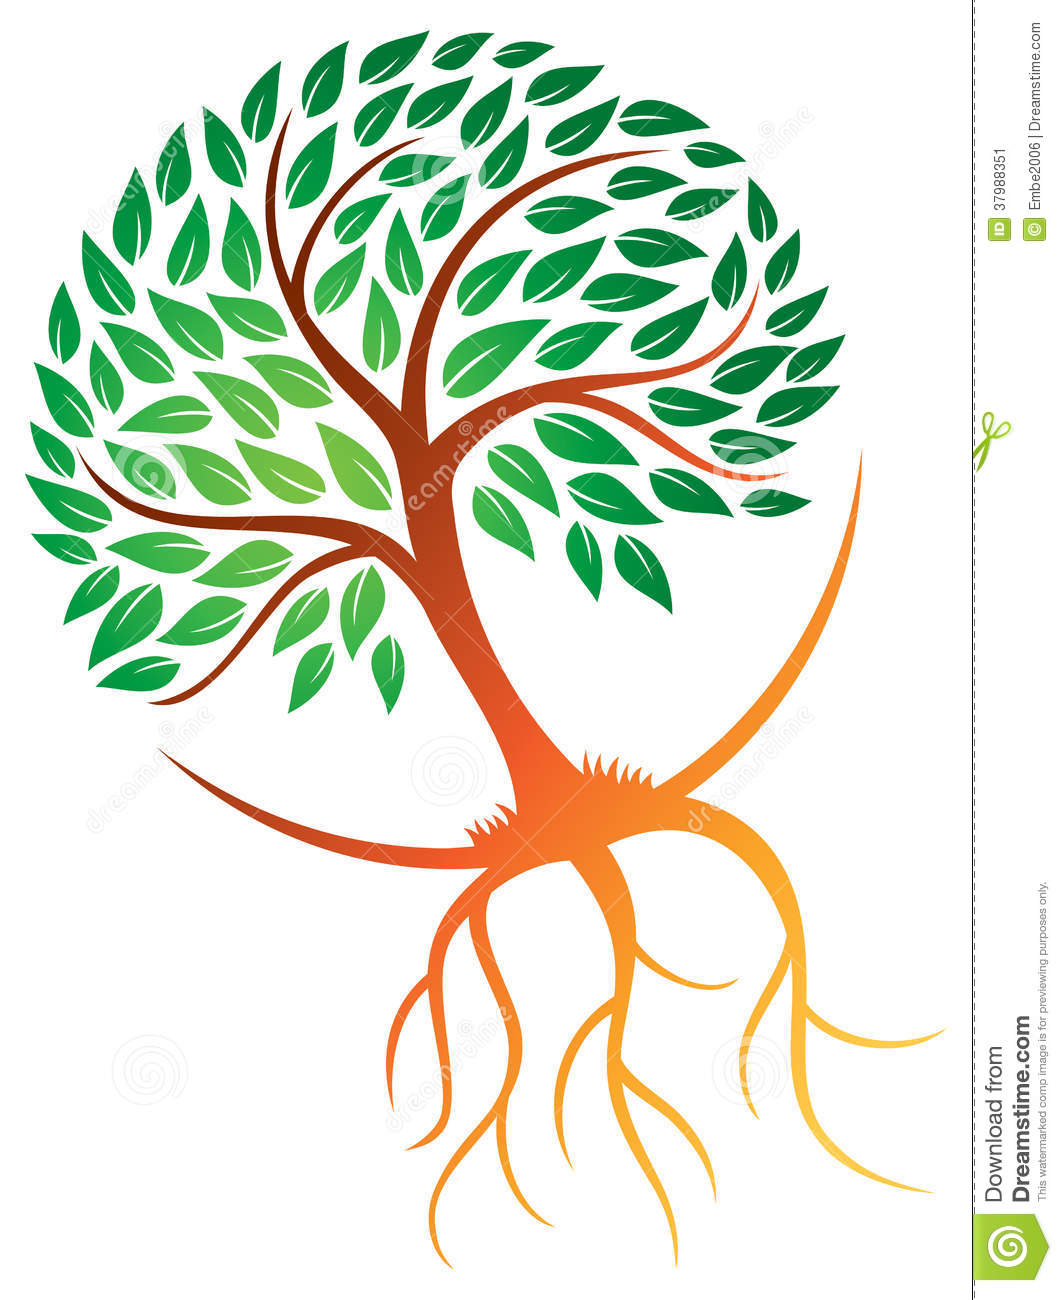 Tree with Roots Logo